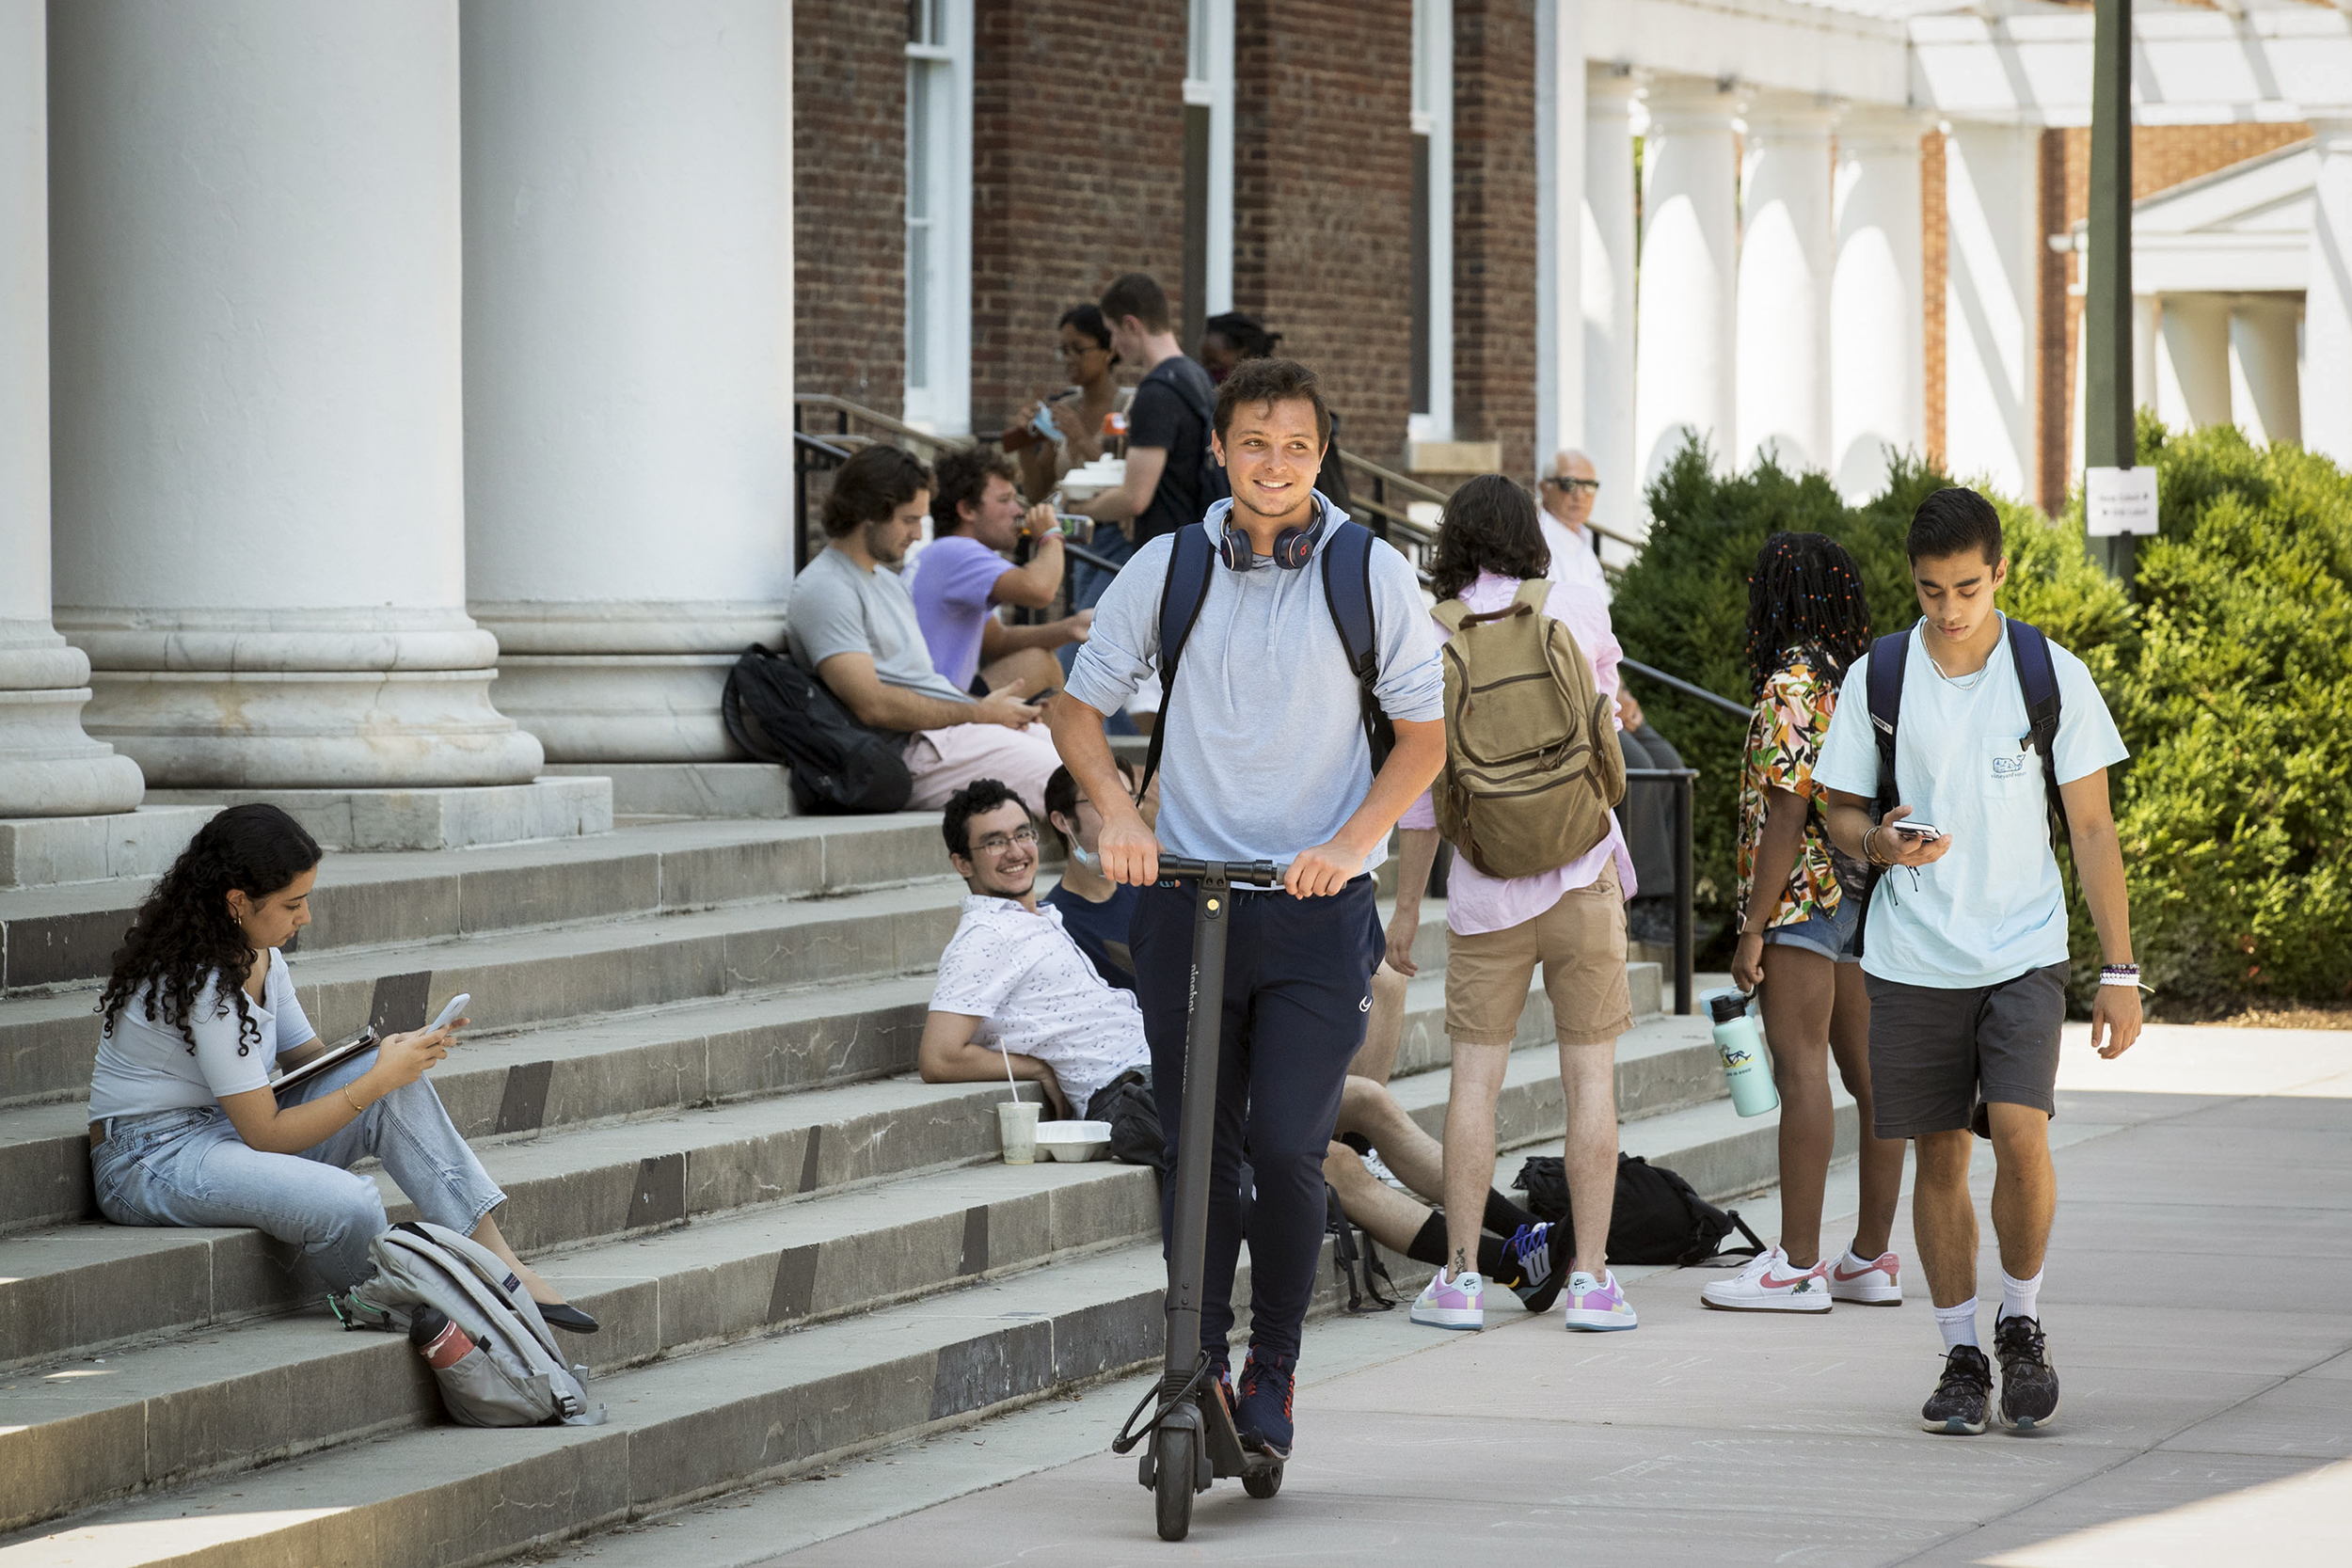 Students sittiing on steps, walking, and riding a scooter on a sidewalk in front of the steps